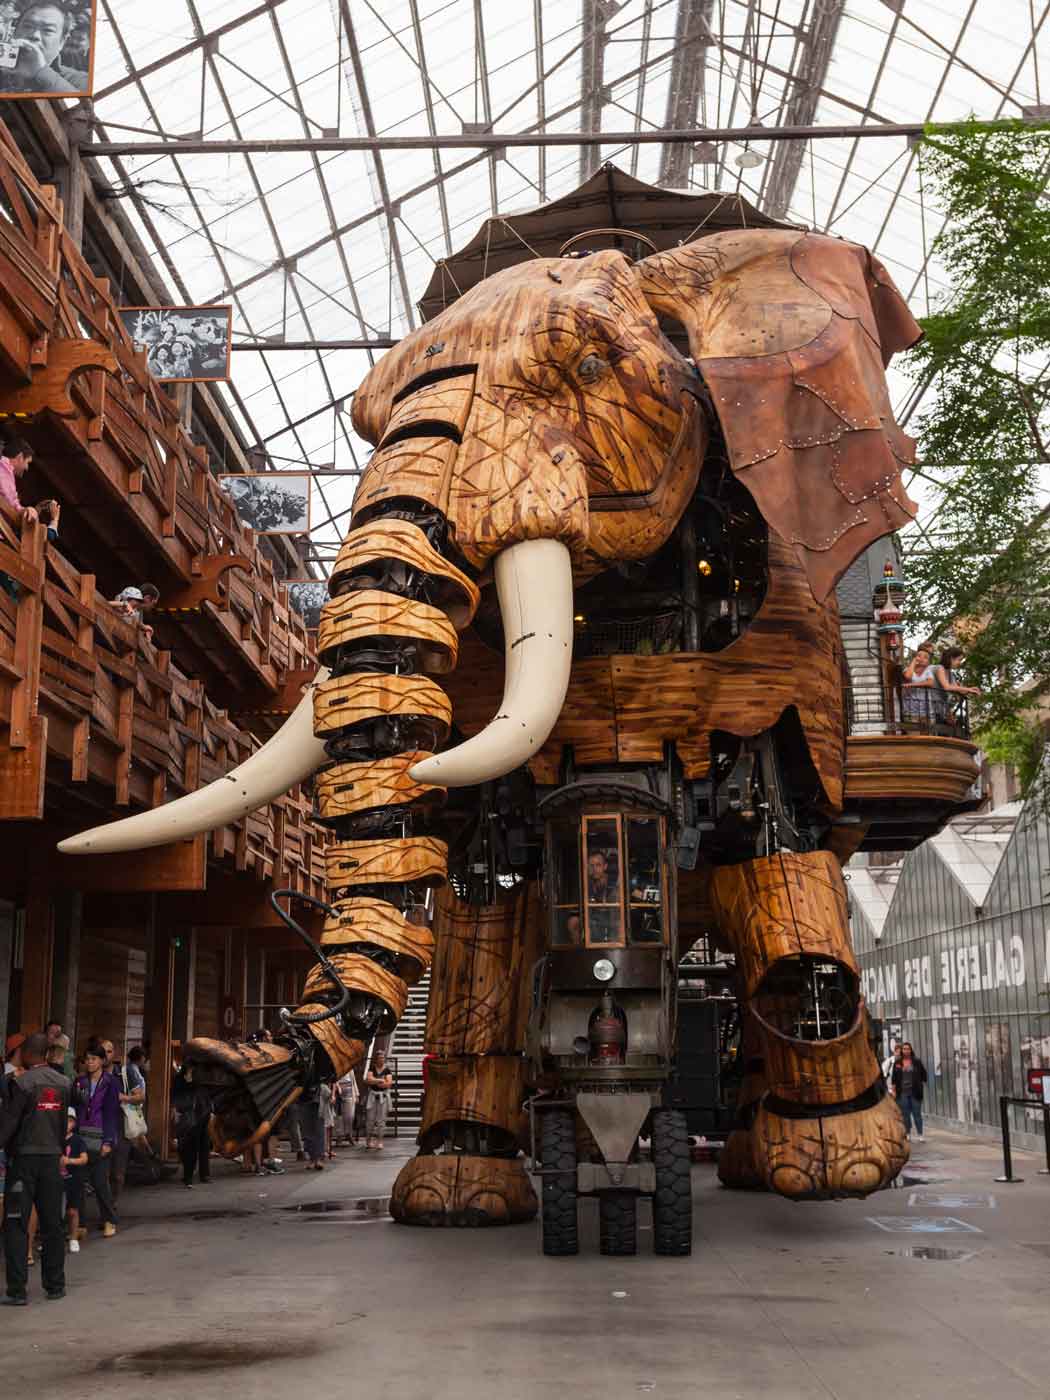 The giant mecanical elephant of The Ile’s Machines in Nantes